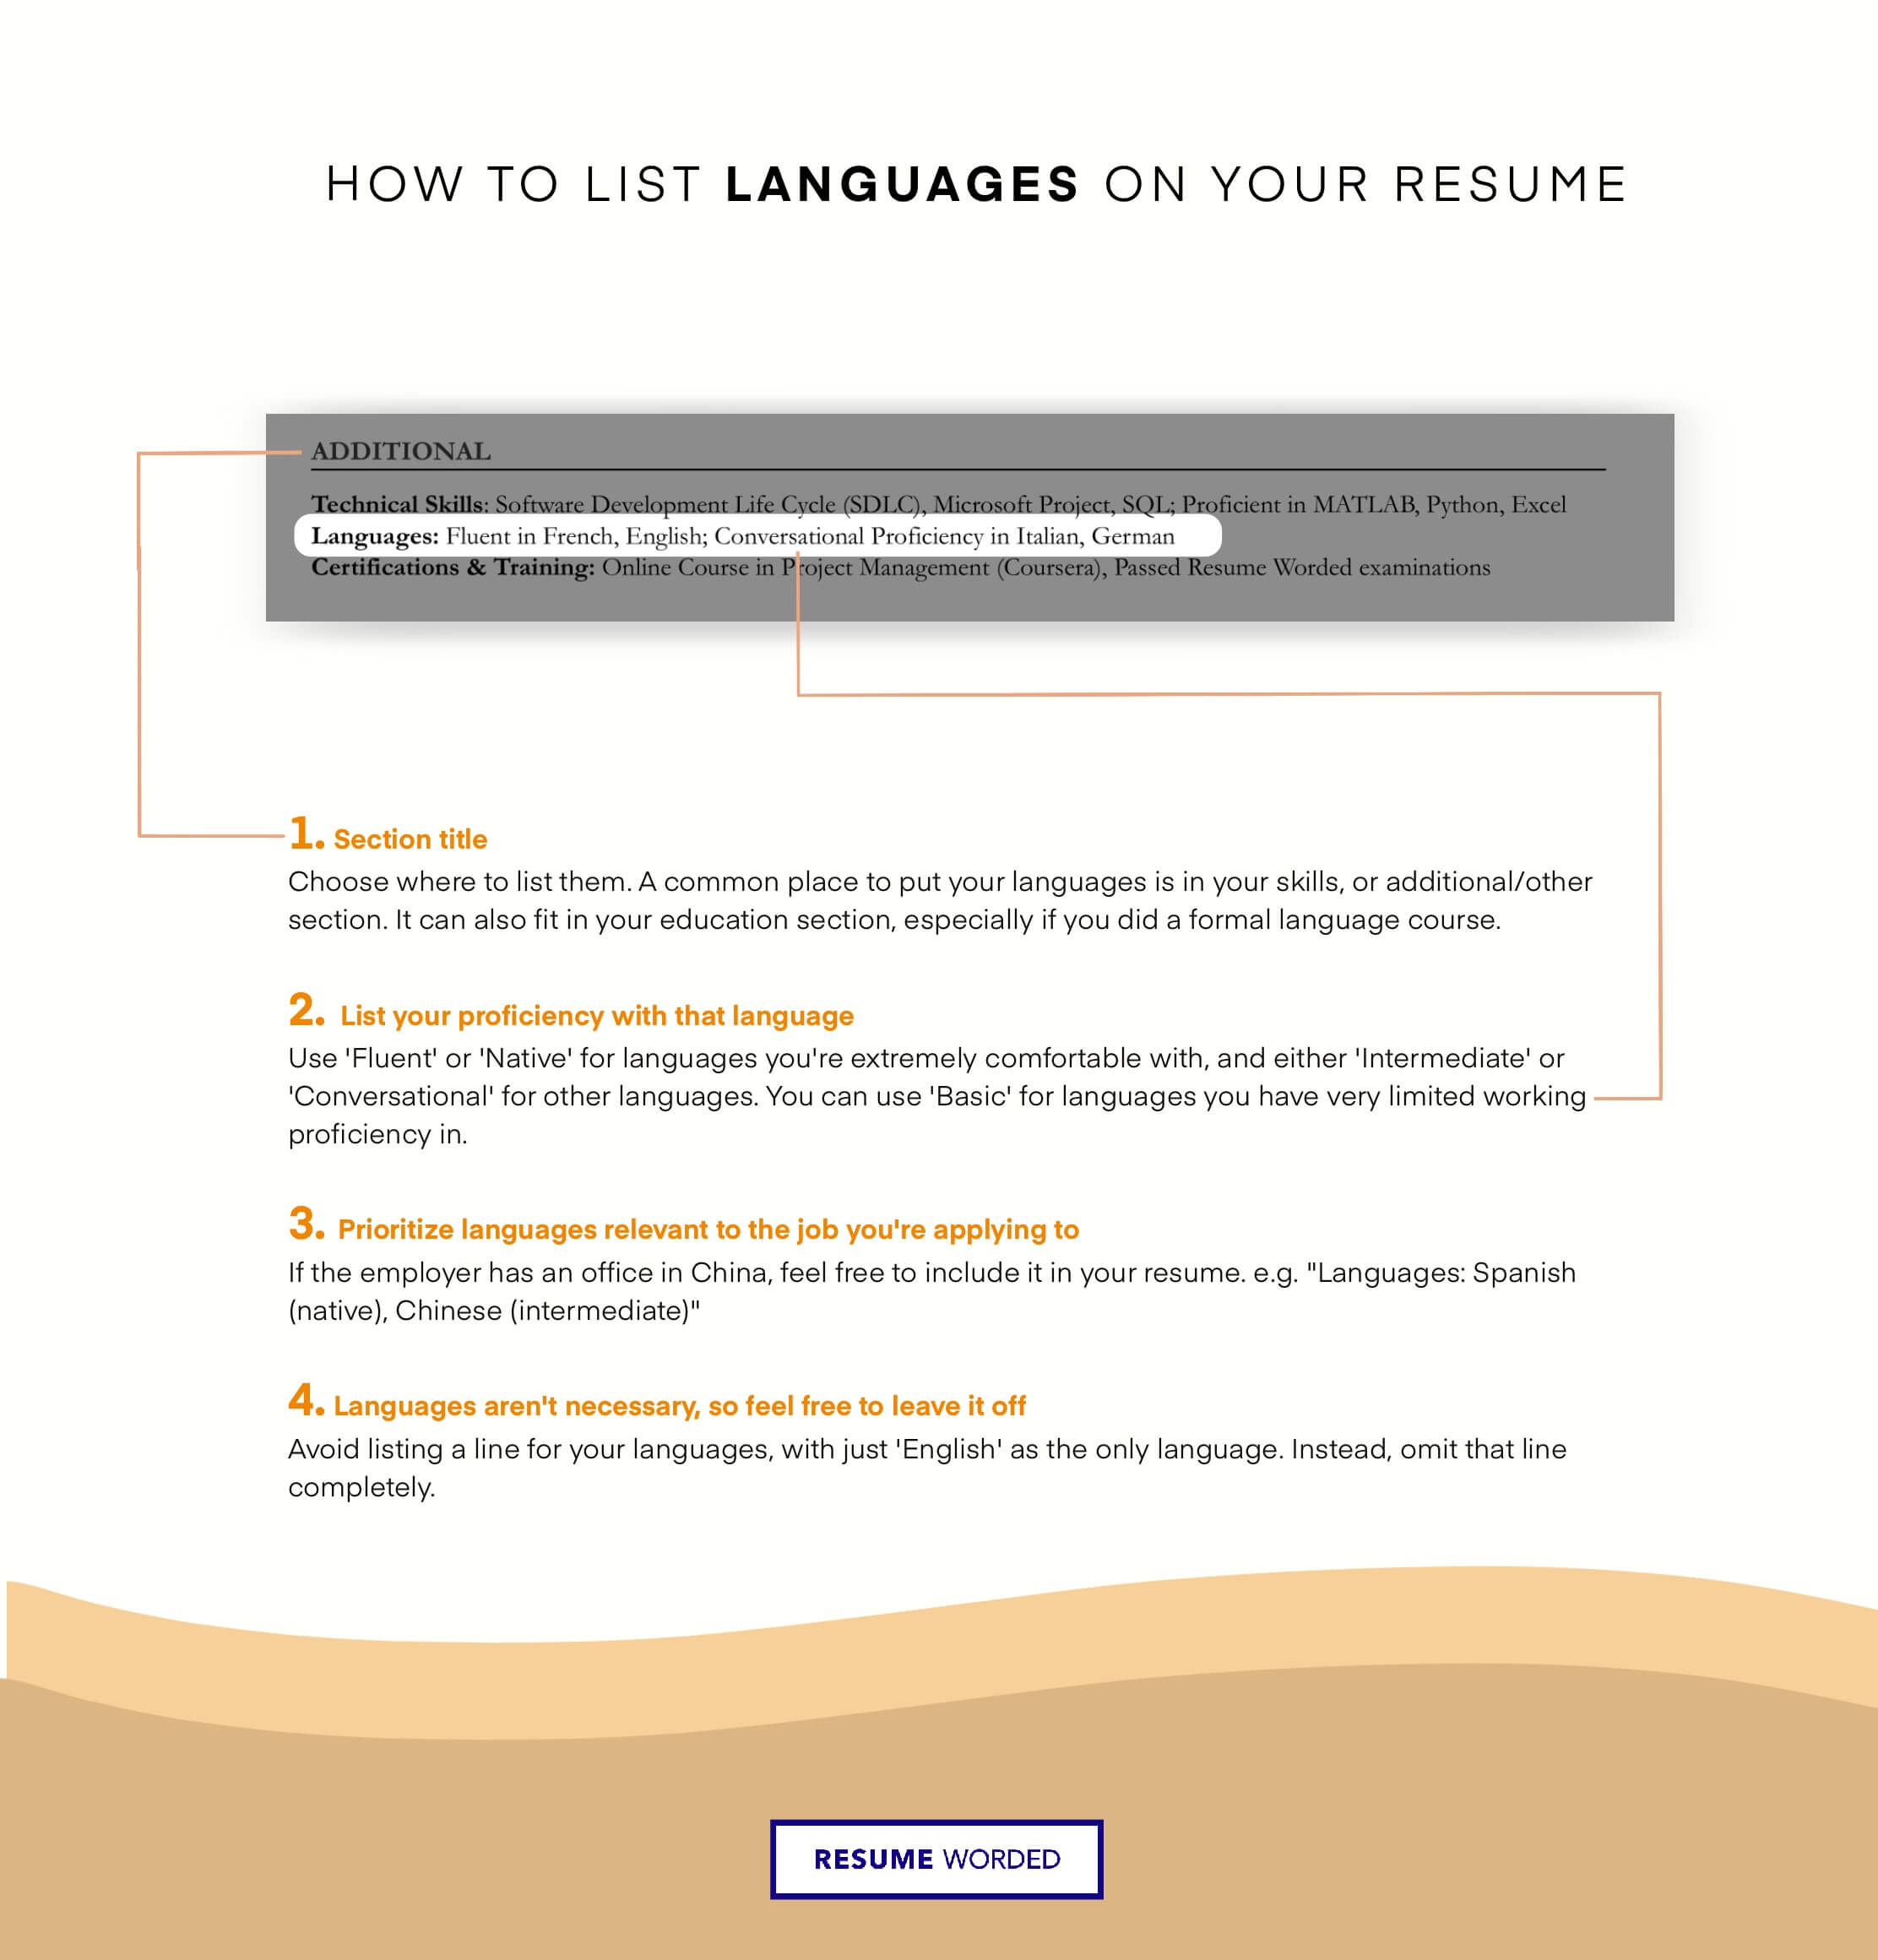 Include all languages spoken and your level of ability in each. - Change Communications Manager Resume